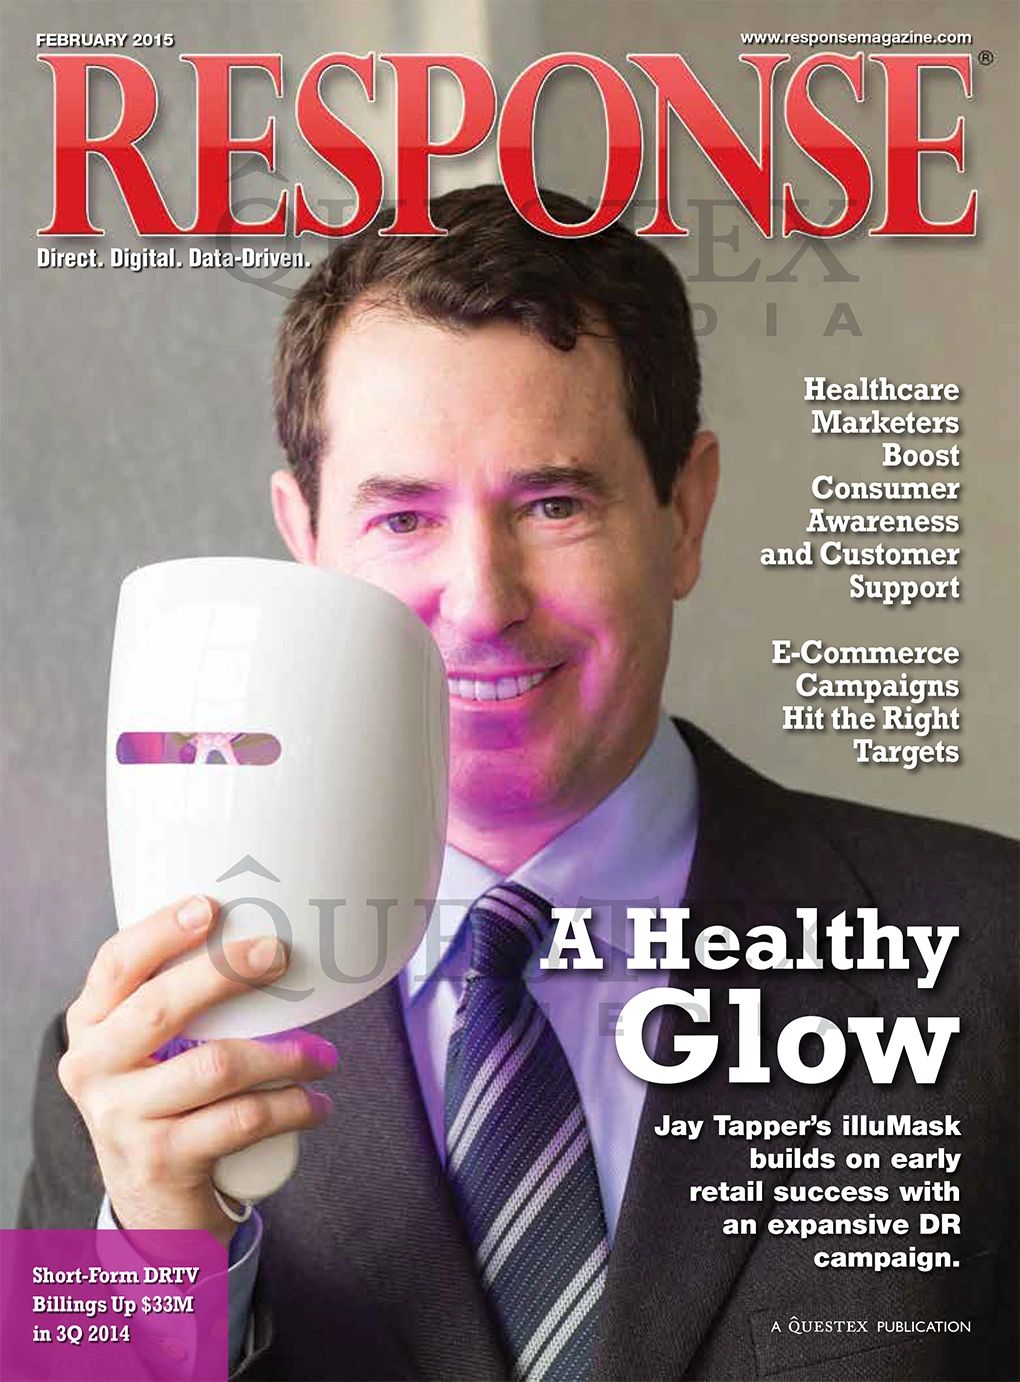 CEO Jay Tapper smiles and holds the acne-fighting illuMask light therapy mask in front of his face